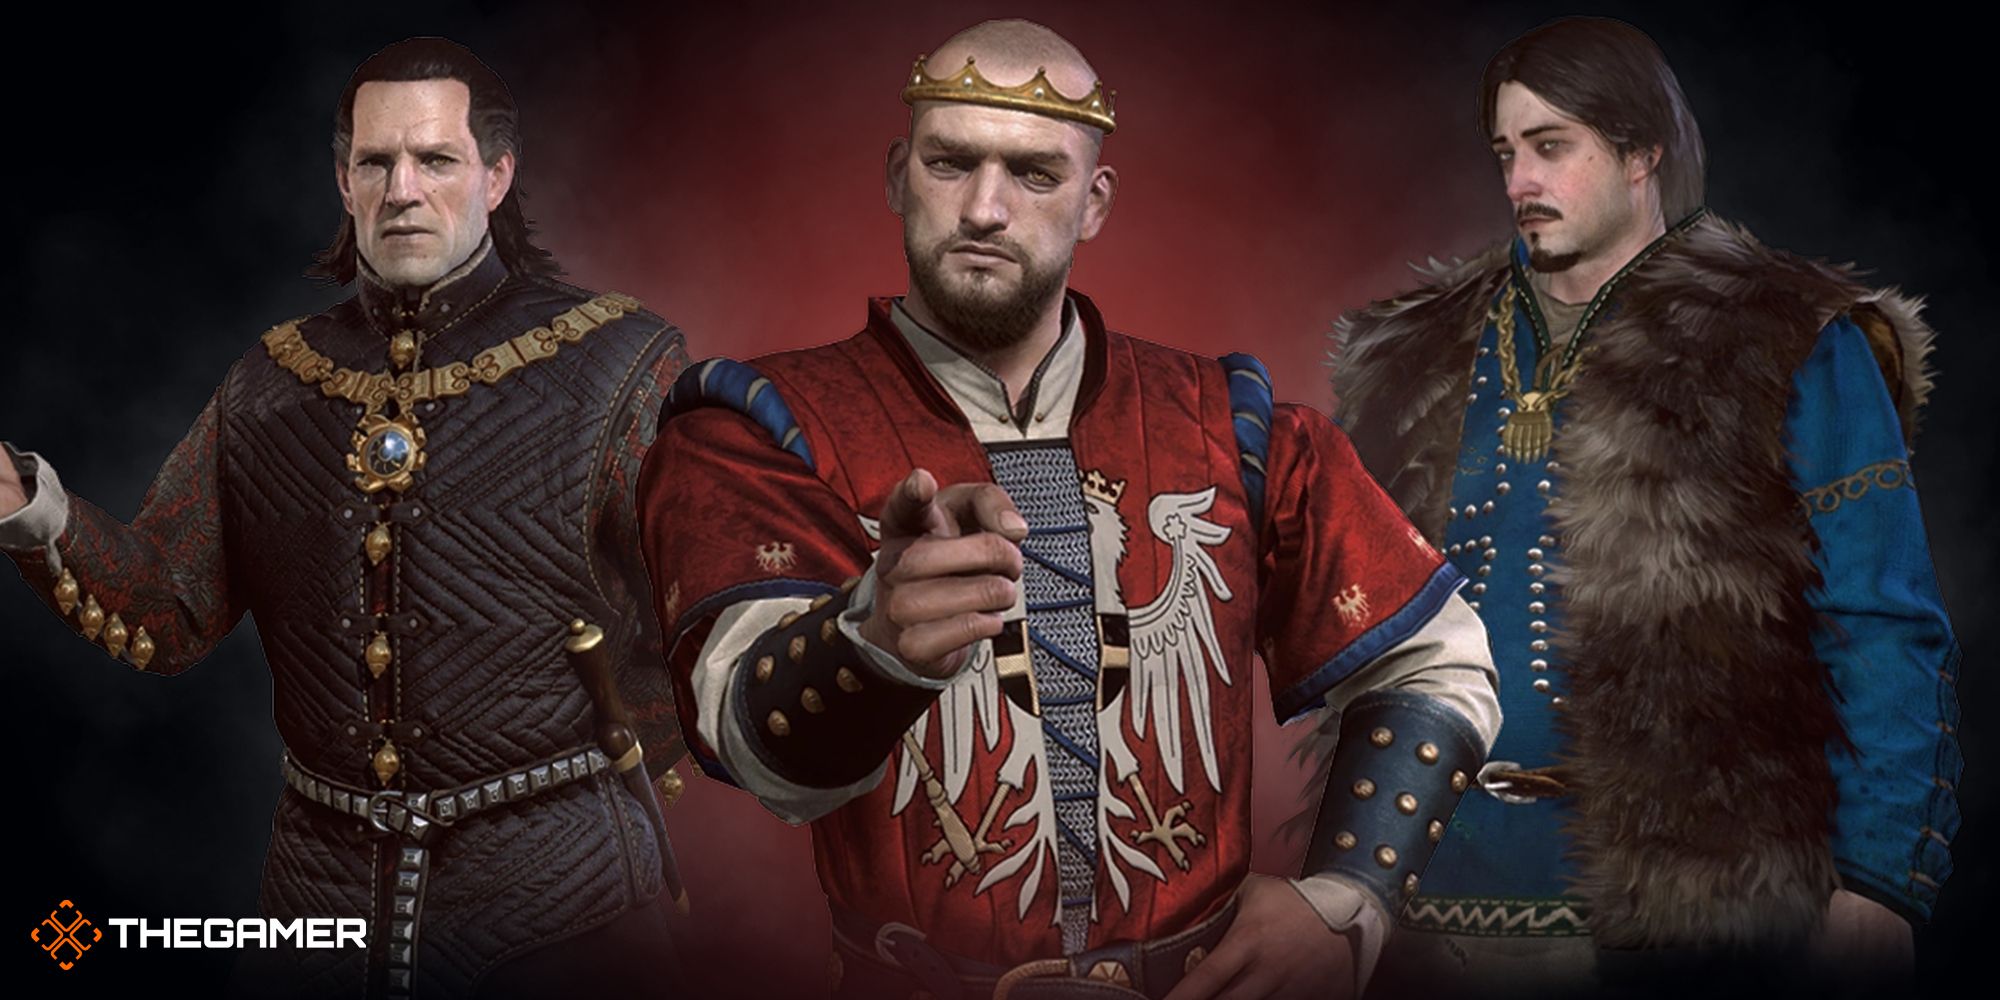 9 the witcher 3 every kingdom ruler ending and how to get them